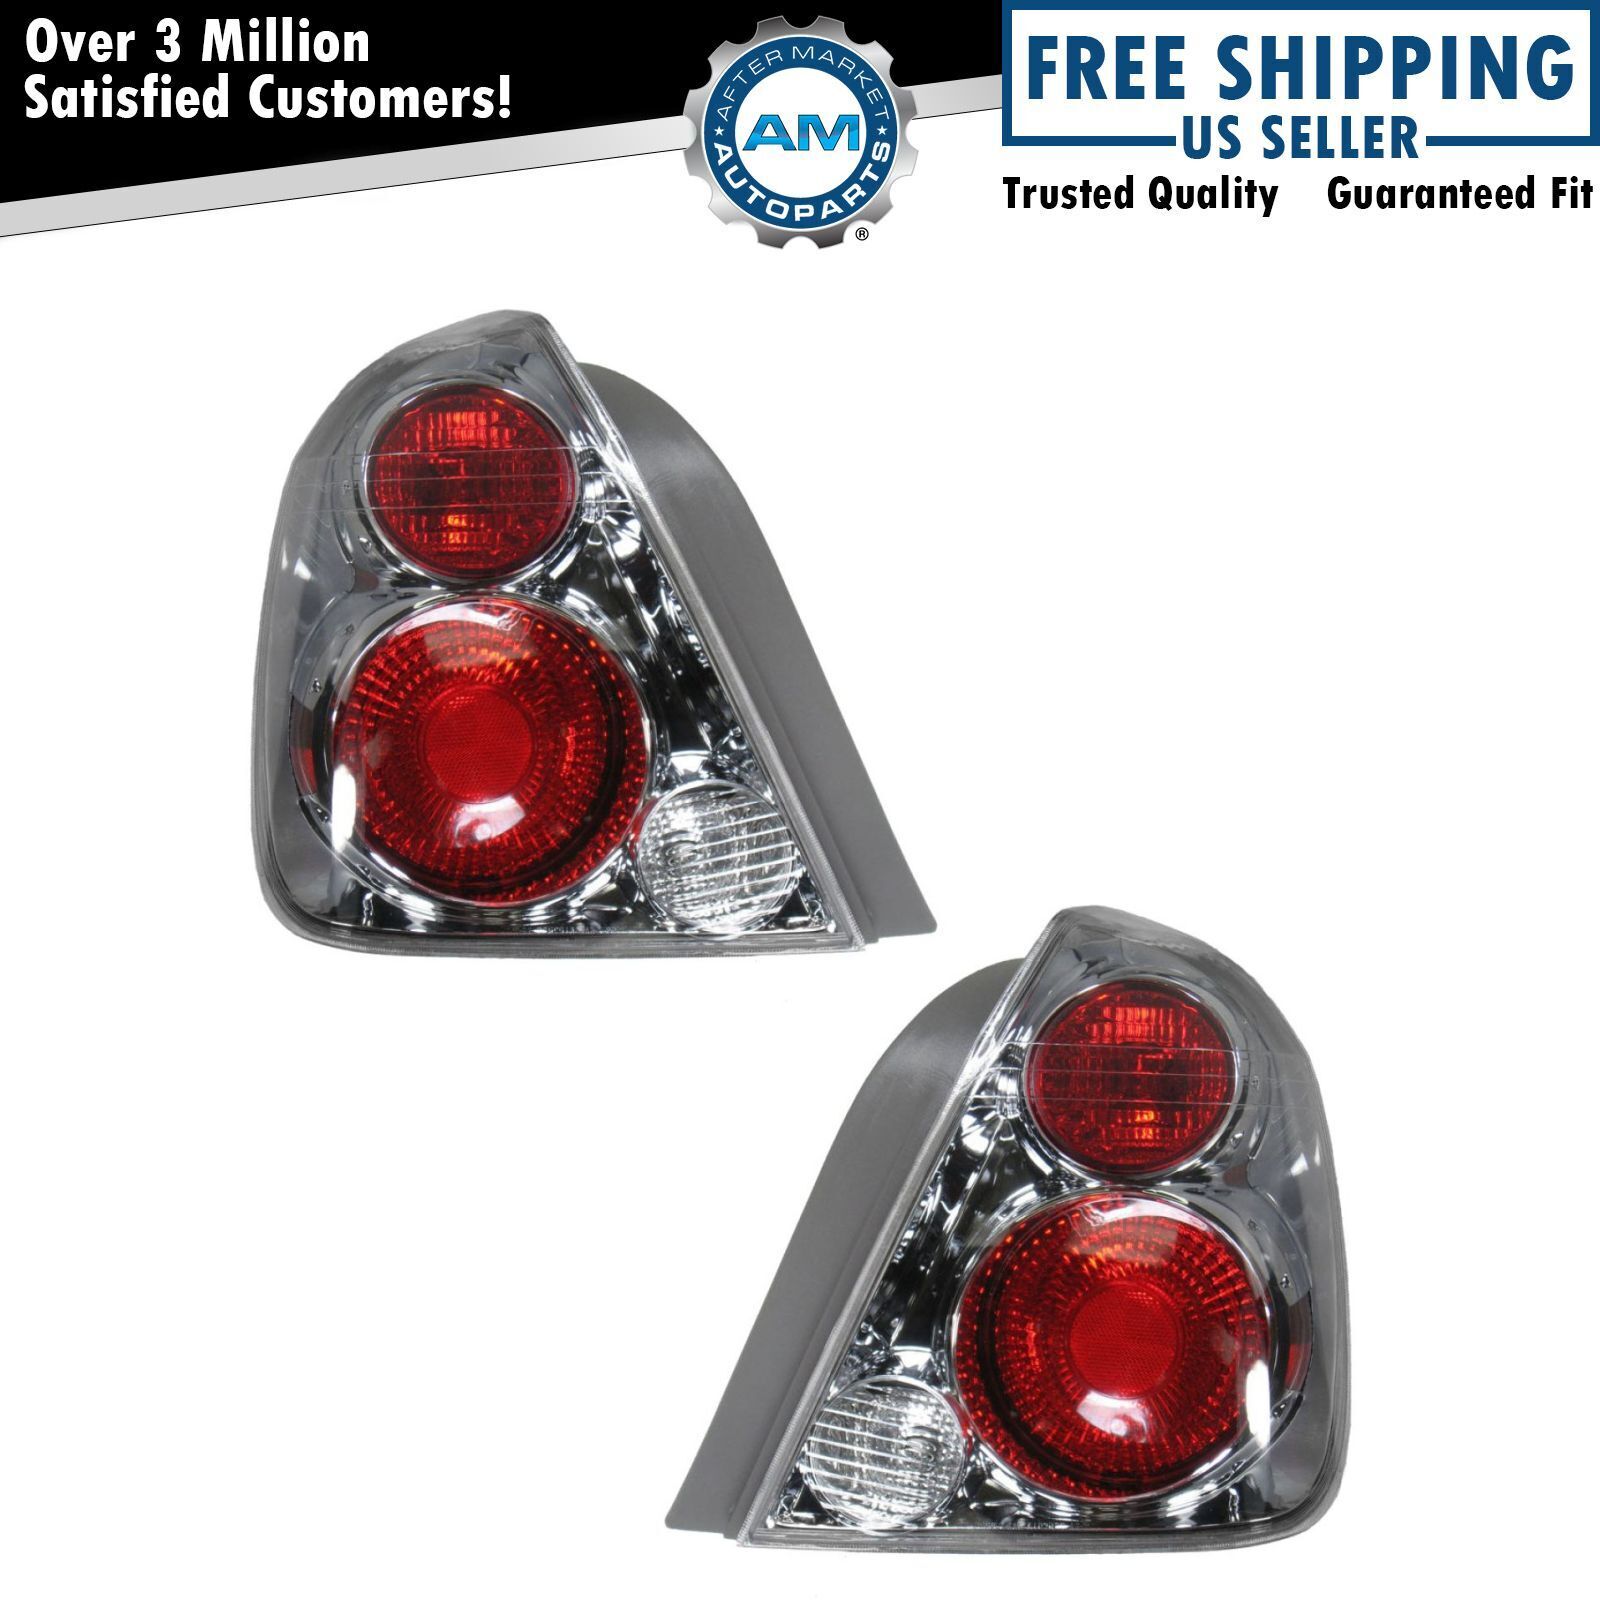 Taillights Taillamps Brake Lights Left & Right Pair Set for 05-06 Nissan Altima